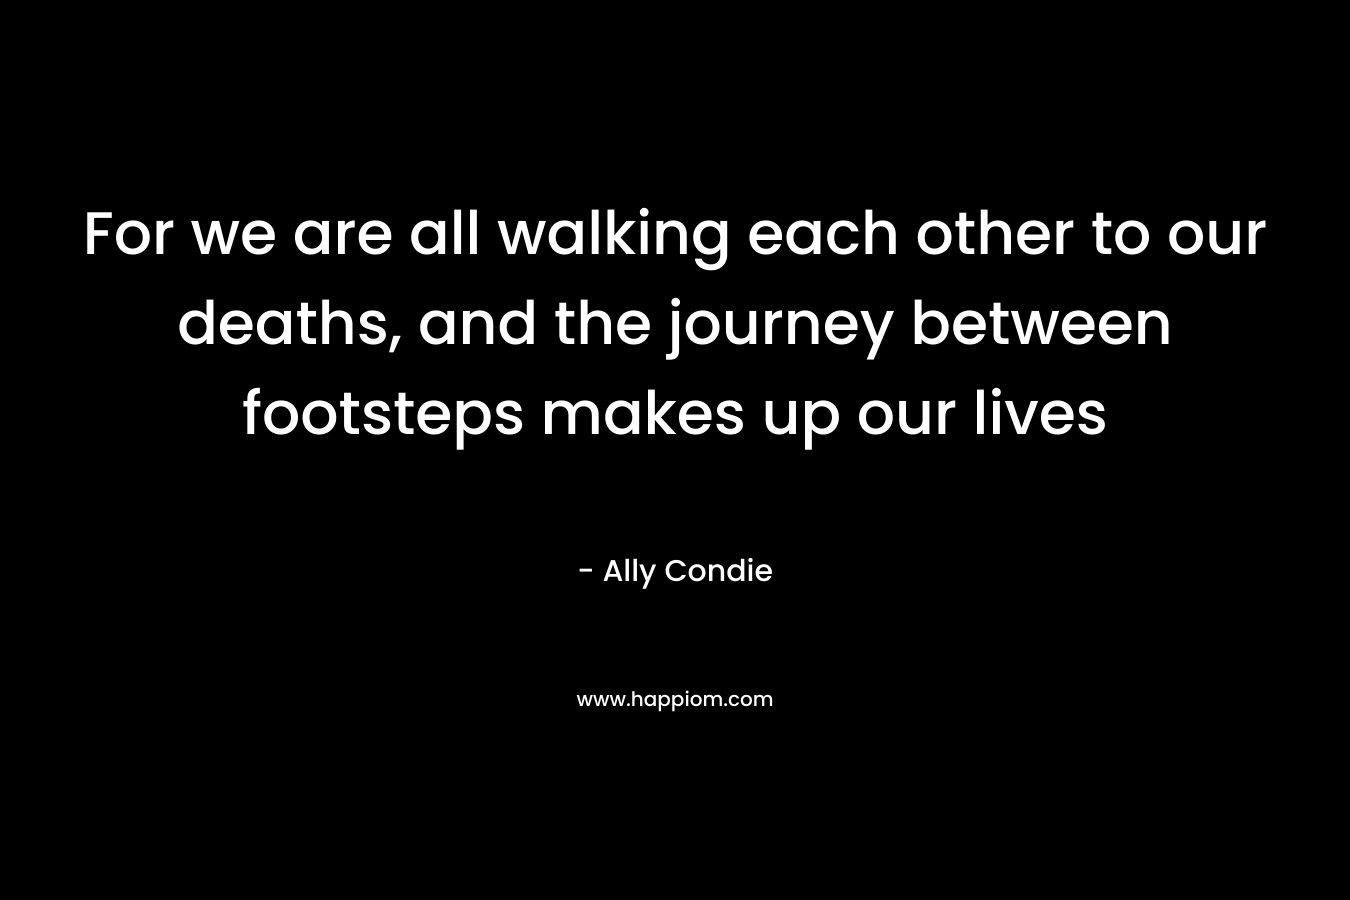 For we are all walking each other to our deaths, and the journey between footsteps makes up our lives